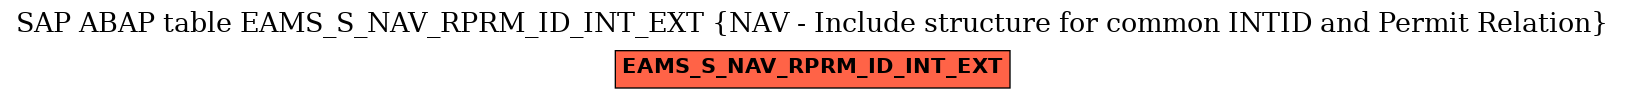 E-R Diagram for table EAMS_S_NAV_RPRM_ID_INT_EXT (NAV - Include structure for common INTID and Permit Relation)